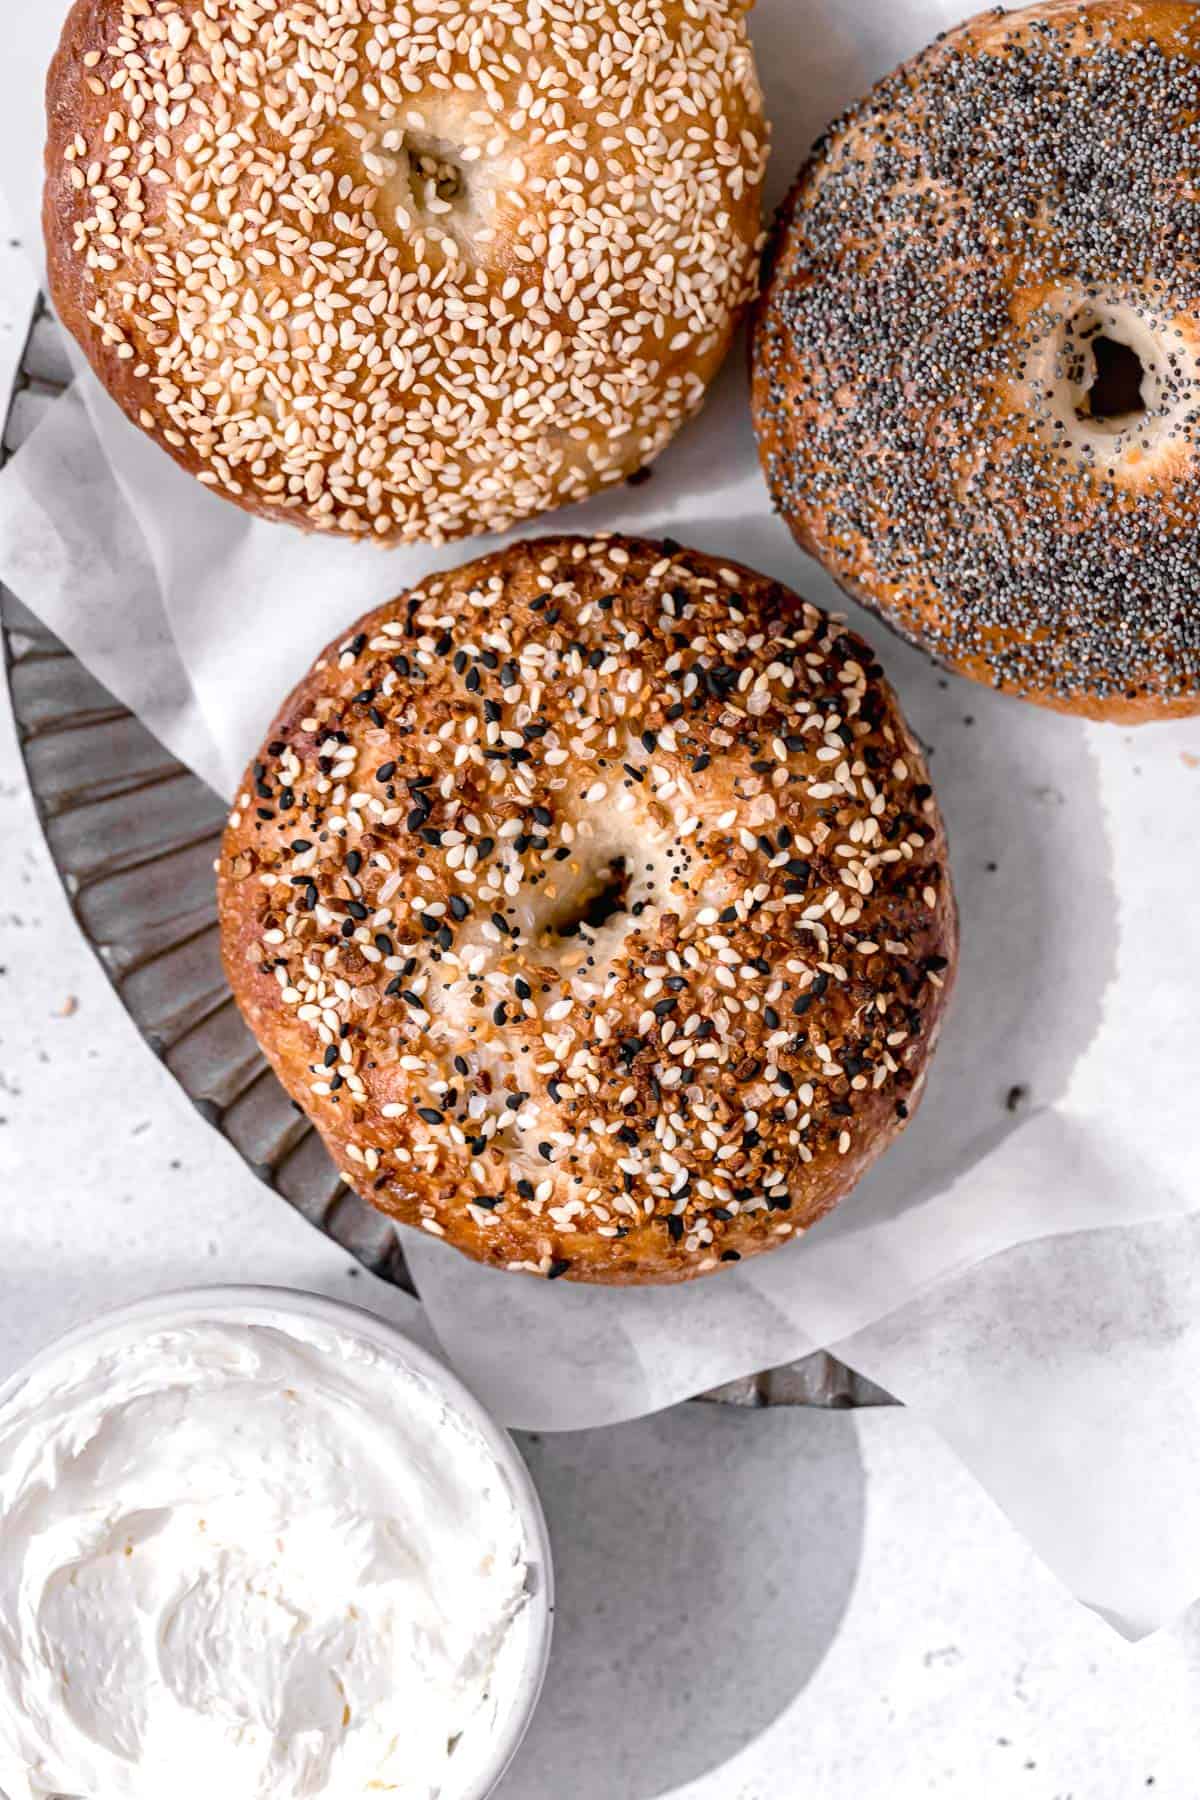 three ny style bagels with everything bagel seasoning, sesame seeds, and poppy seeds.